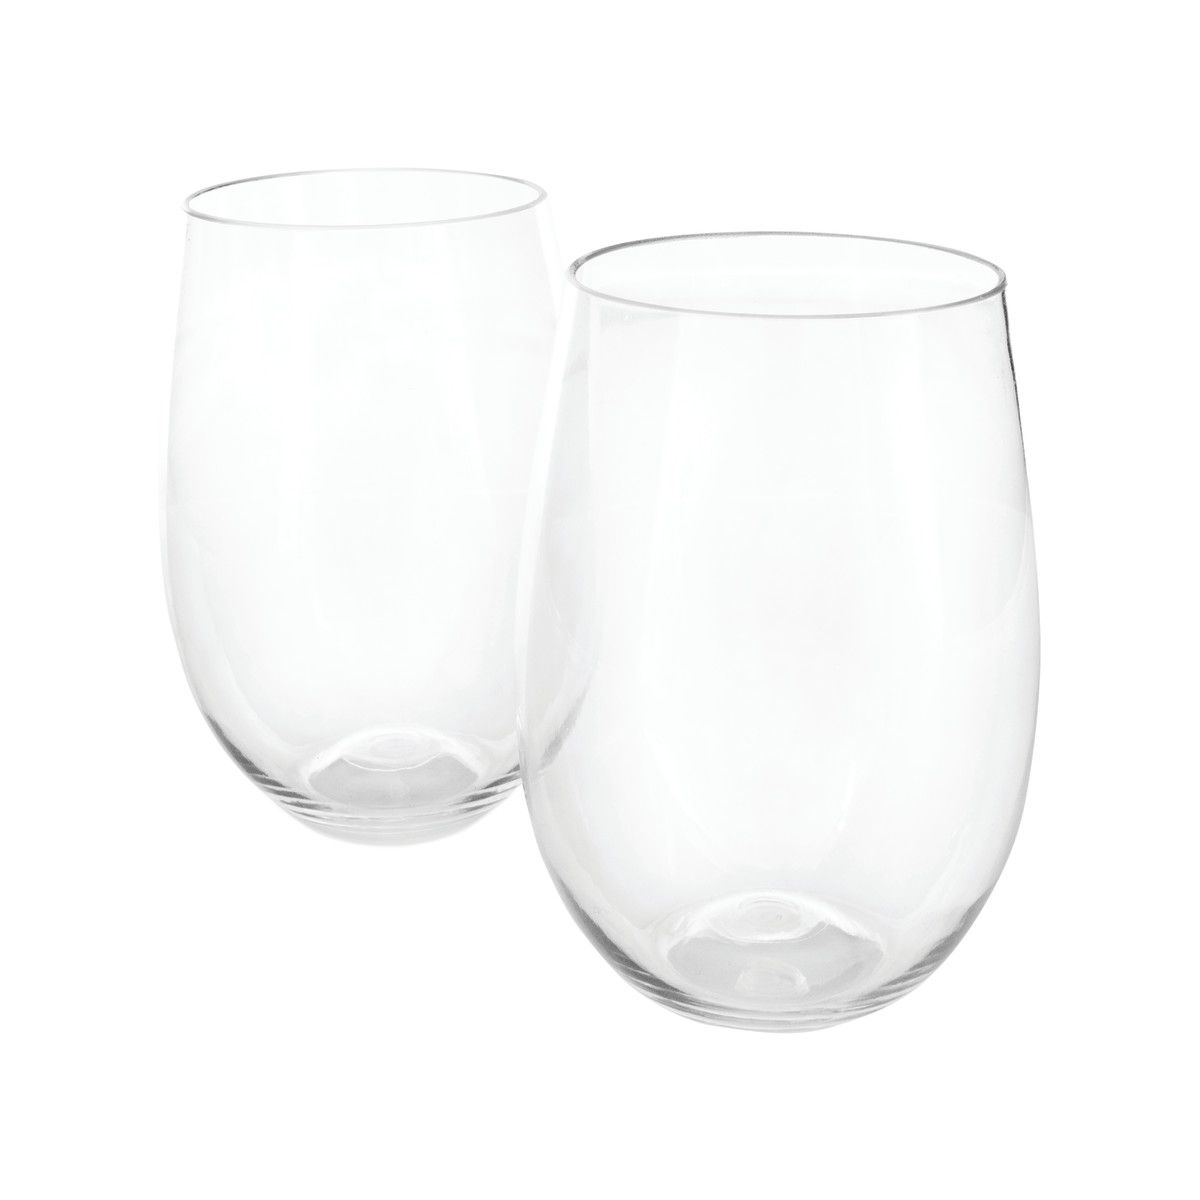 True Insulated Wine Glasses - Double Walled Stemless Wine Glass